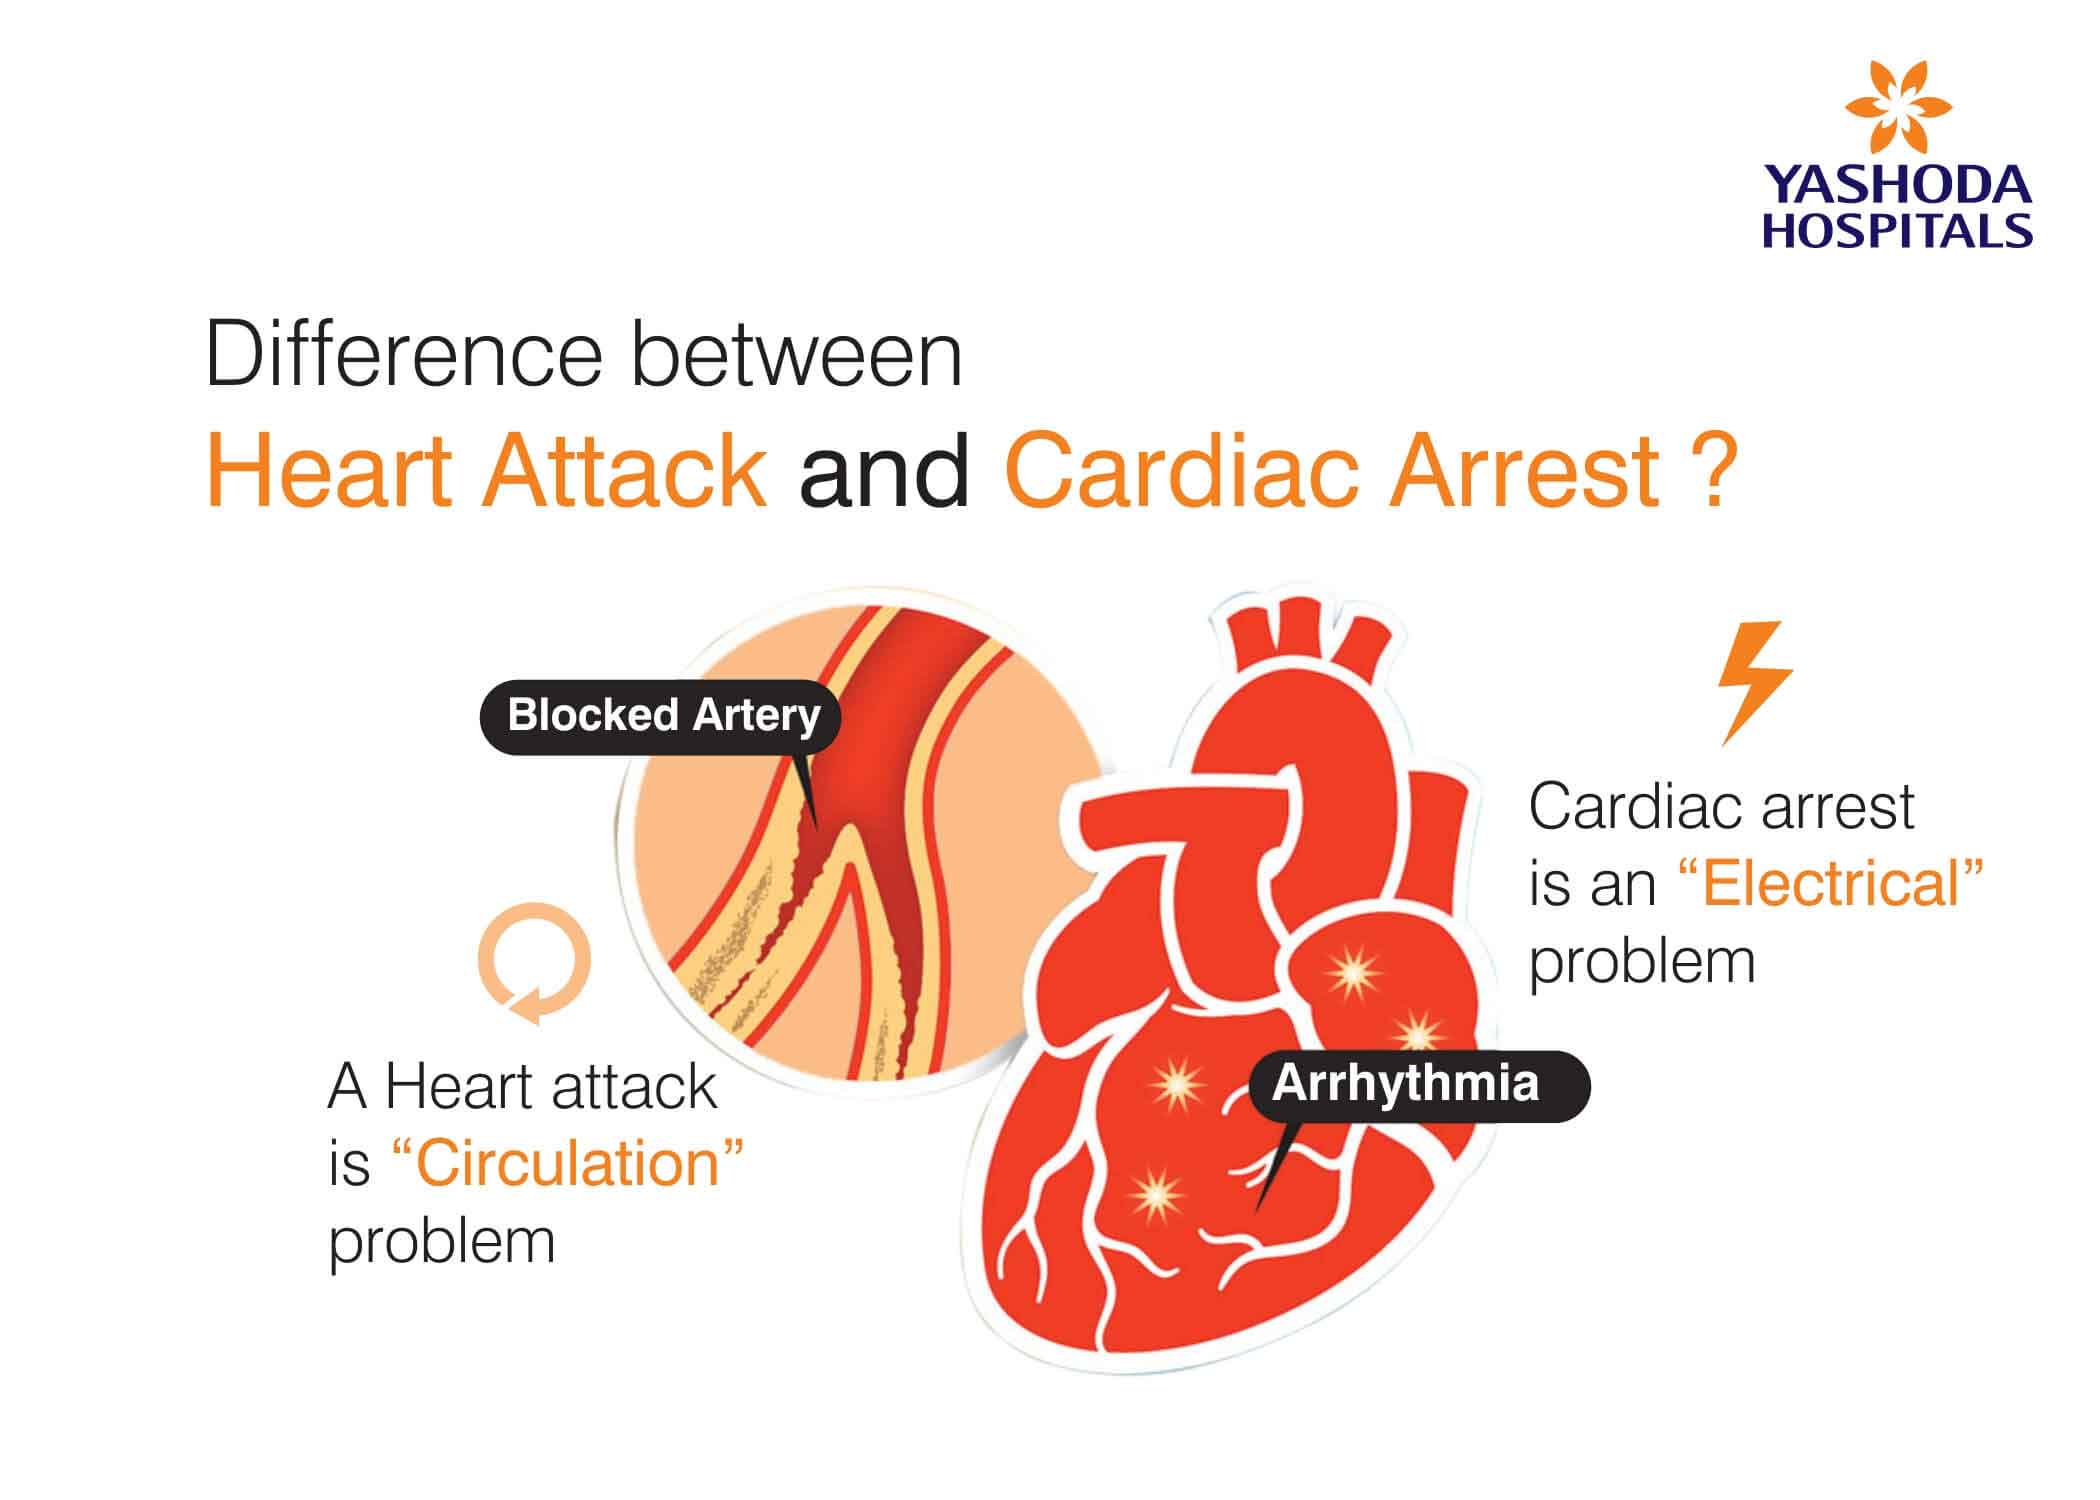 Heart attack and Cardiac arrest